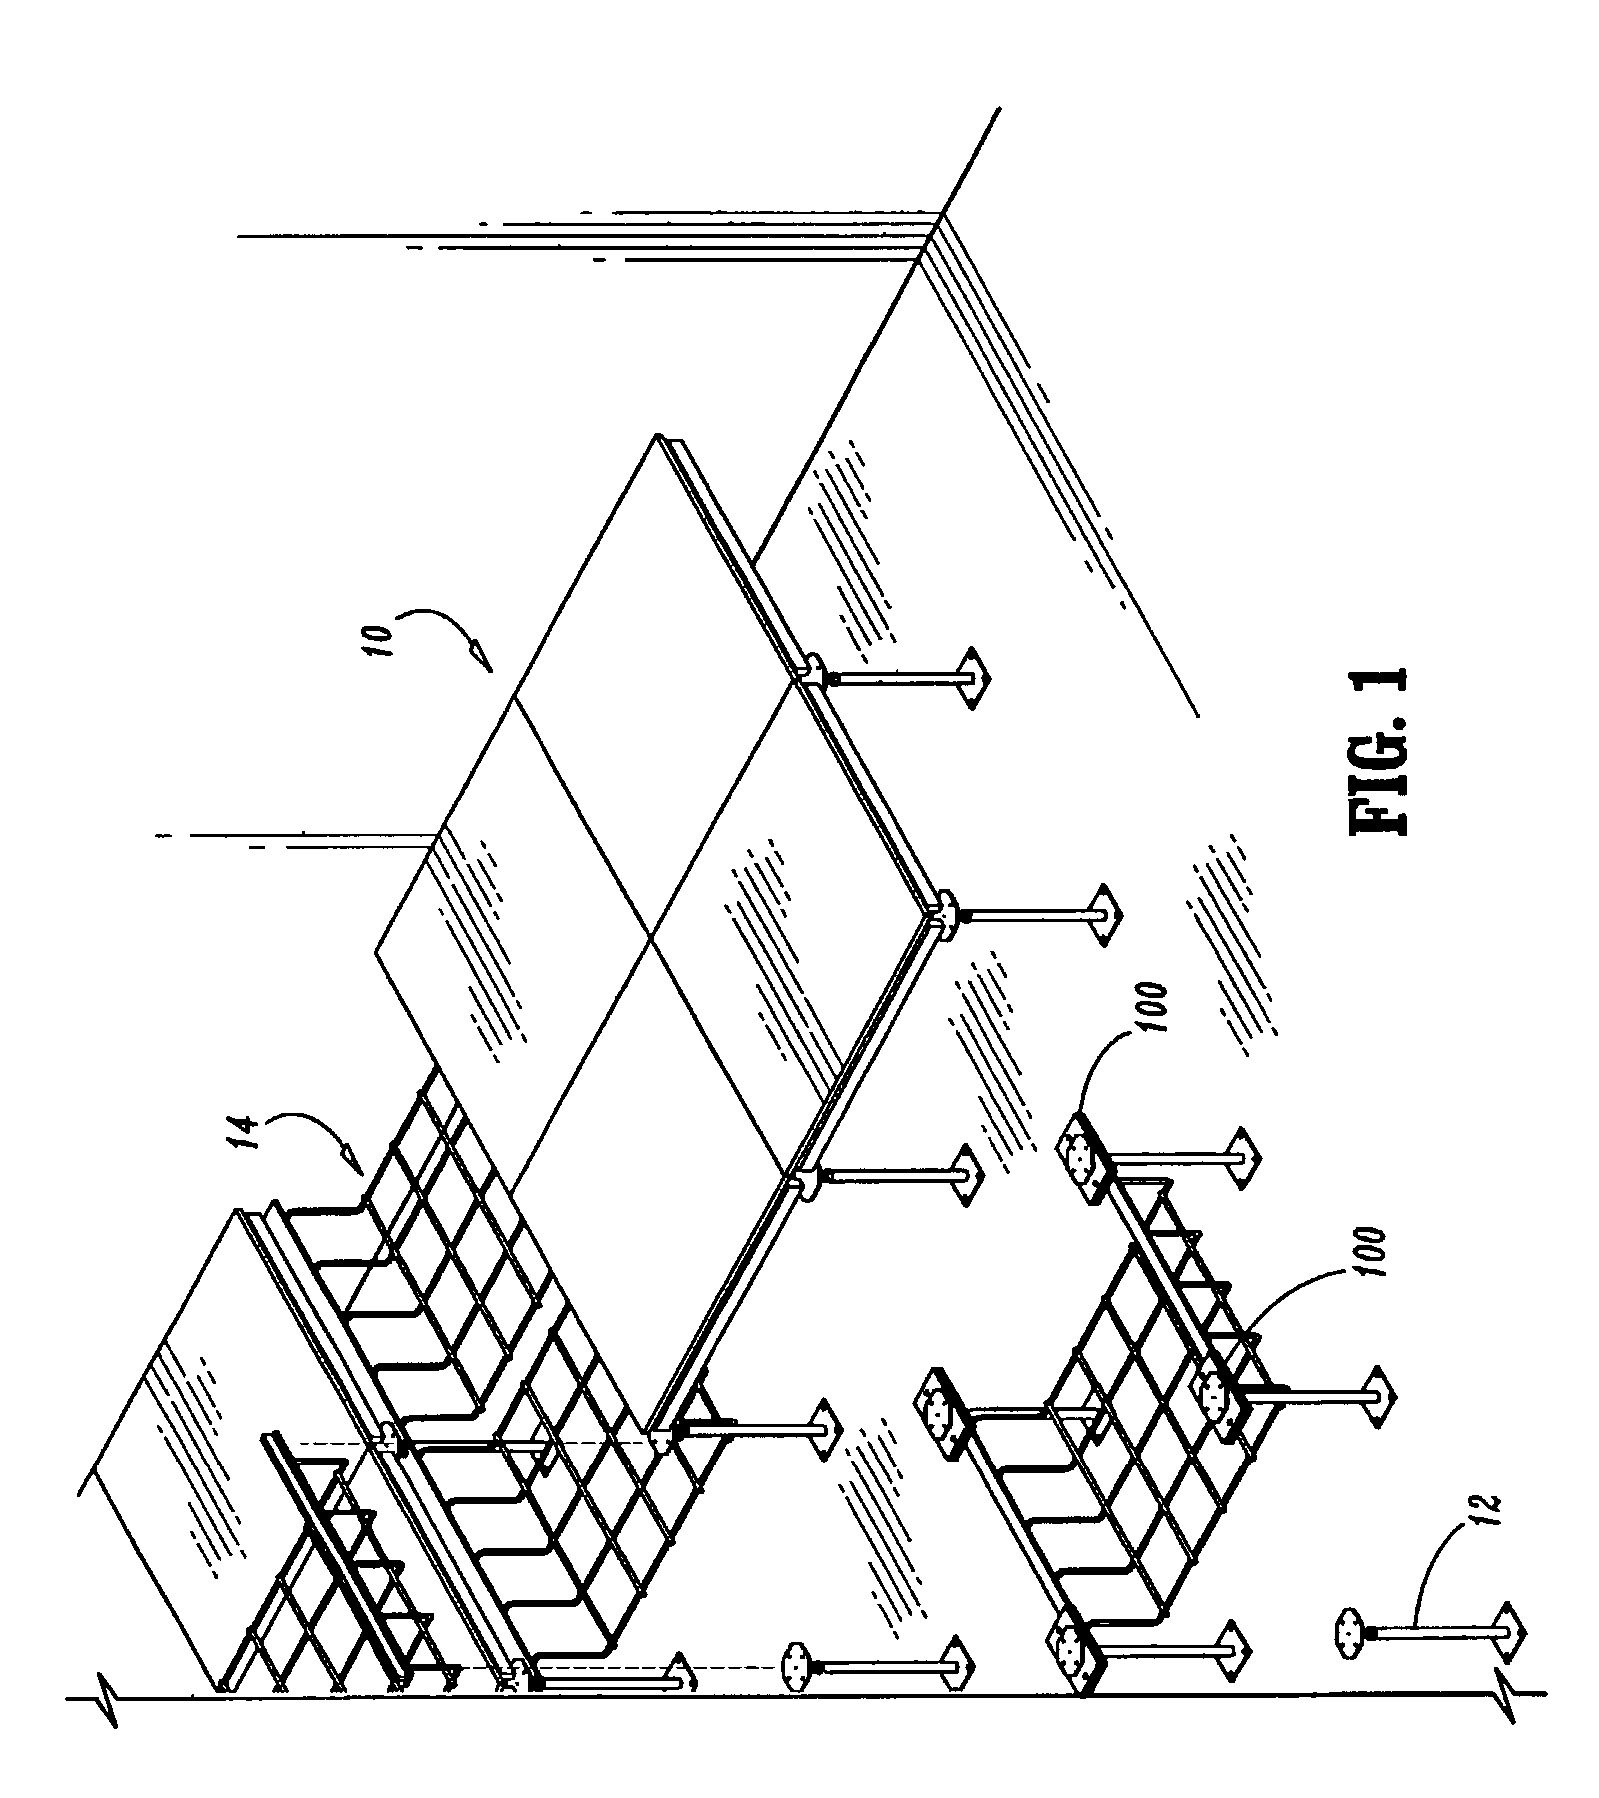 Cable support apparatus for a raised floor system